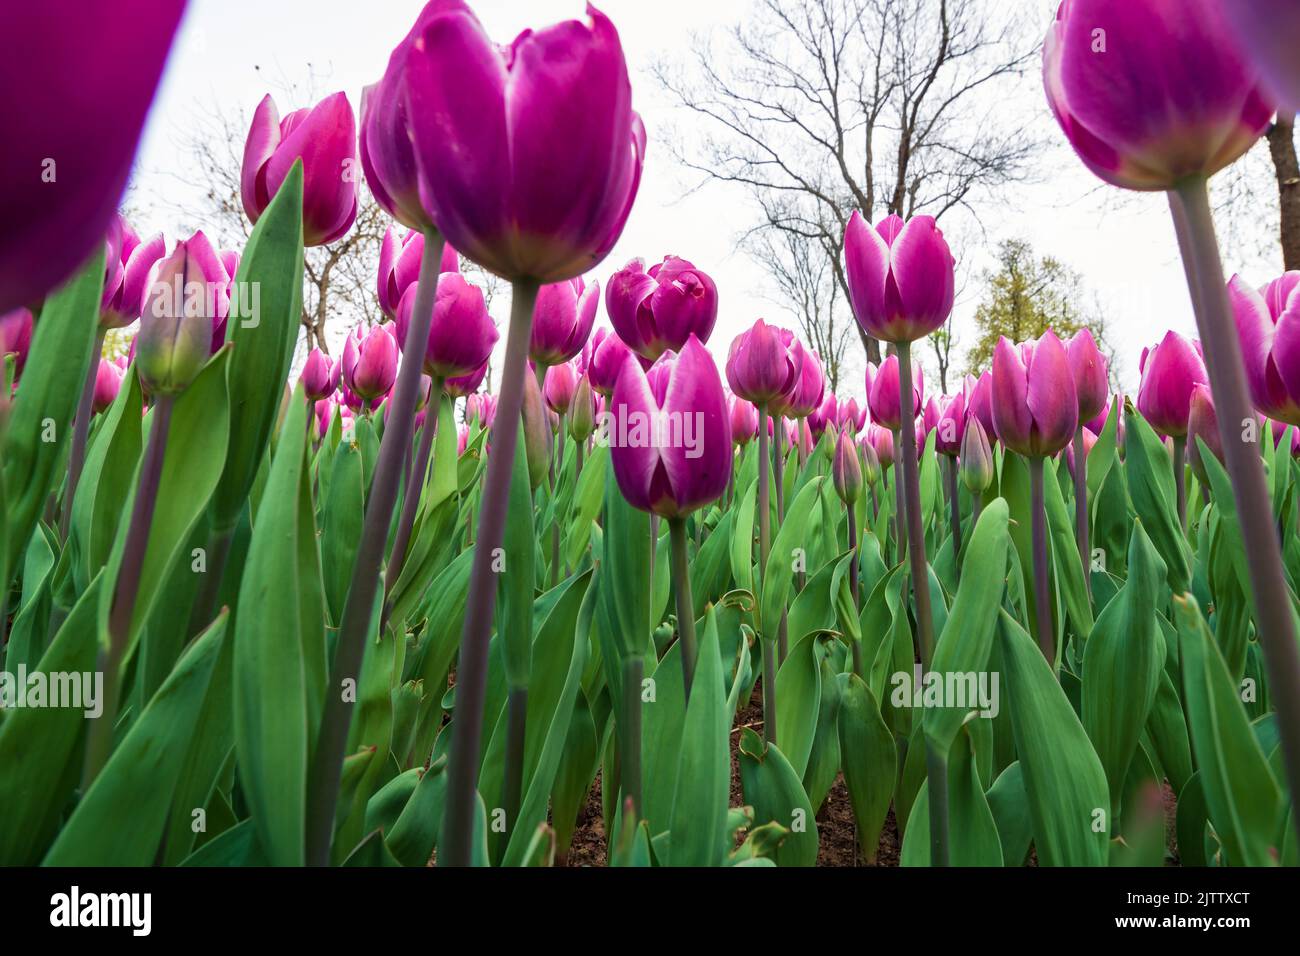 Pink tulips photo. Tulips from below in wide angle view. Spring blossom wallpaper or canvas print photo. Stock Photo